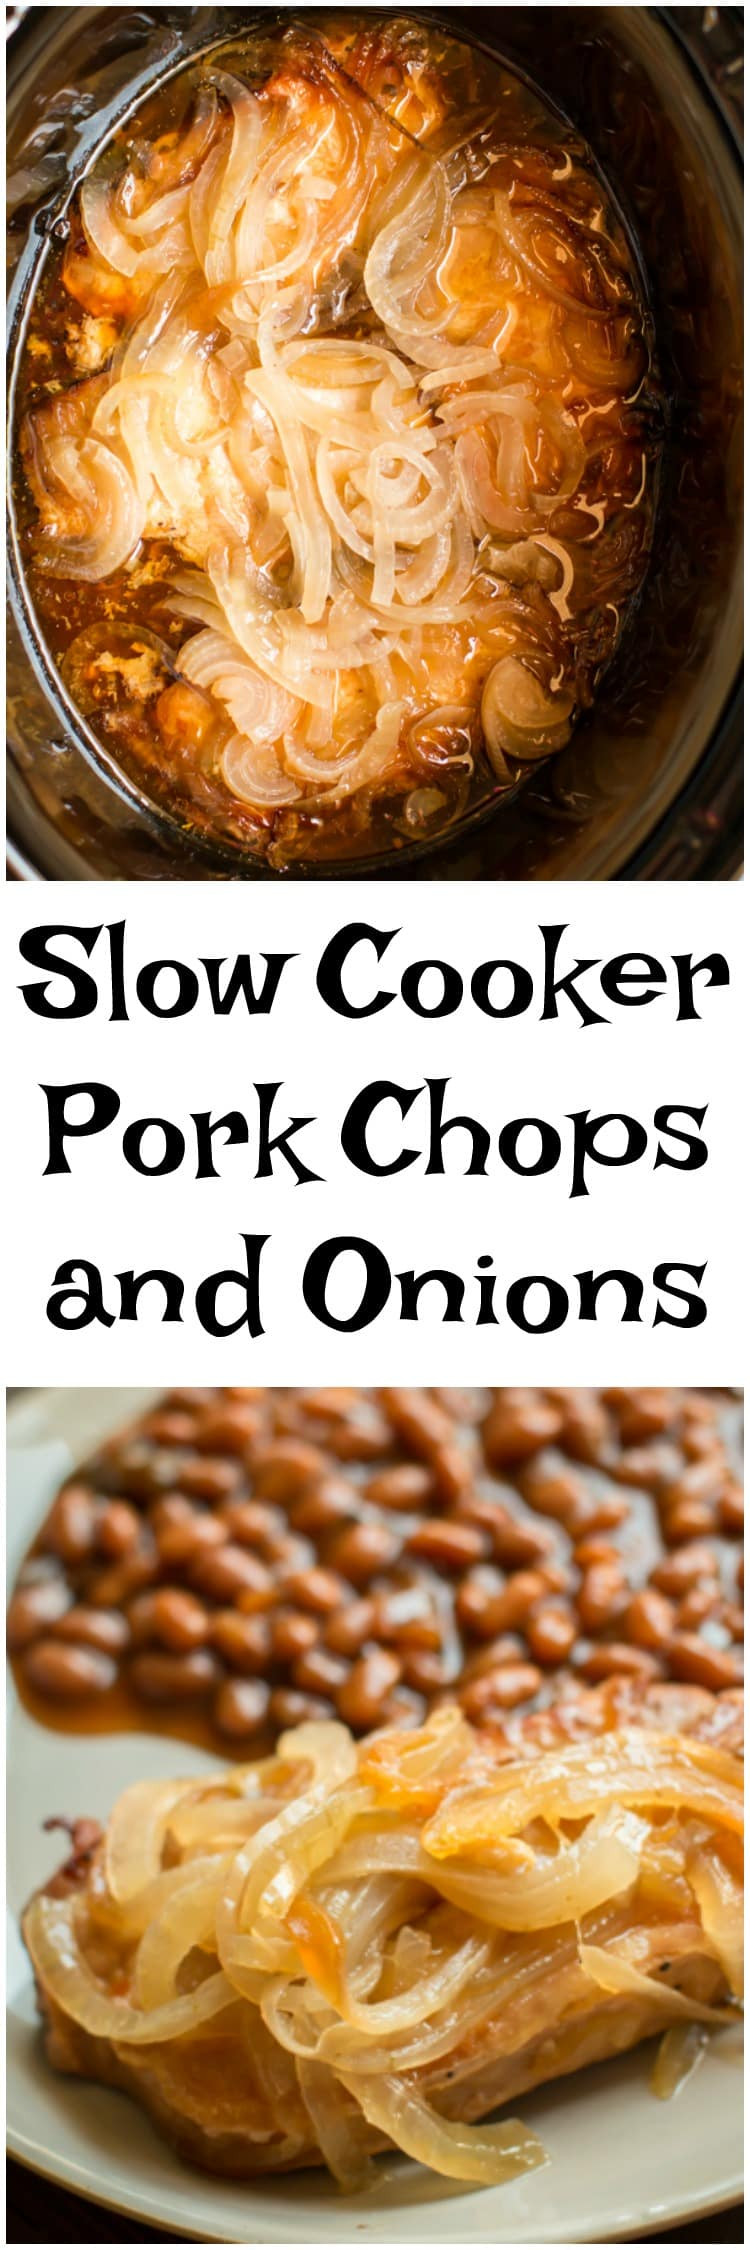 Pork Chops And Red Potatoes Slow Cooker
 Slow Cooker Pork Chops and ions The Magical Slow Cooker